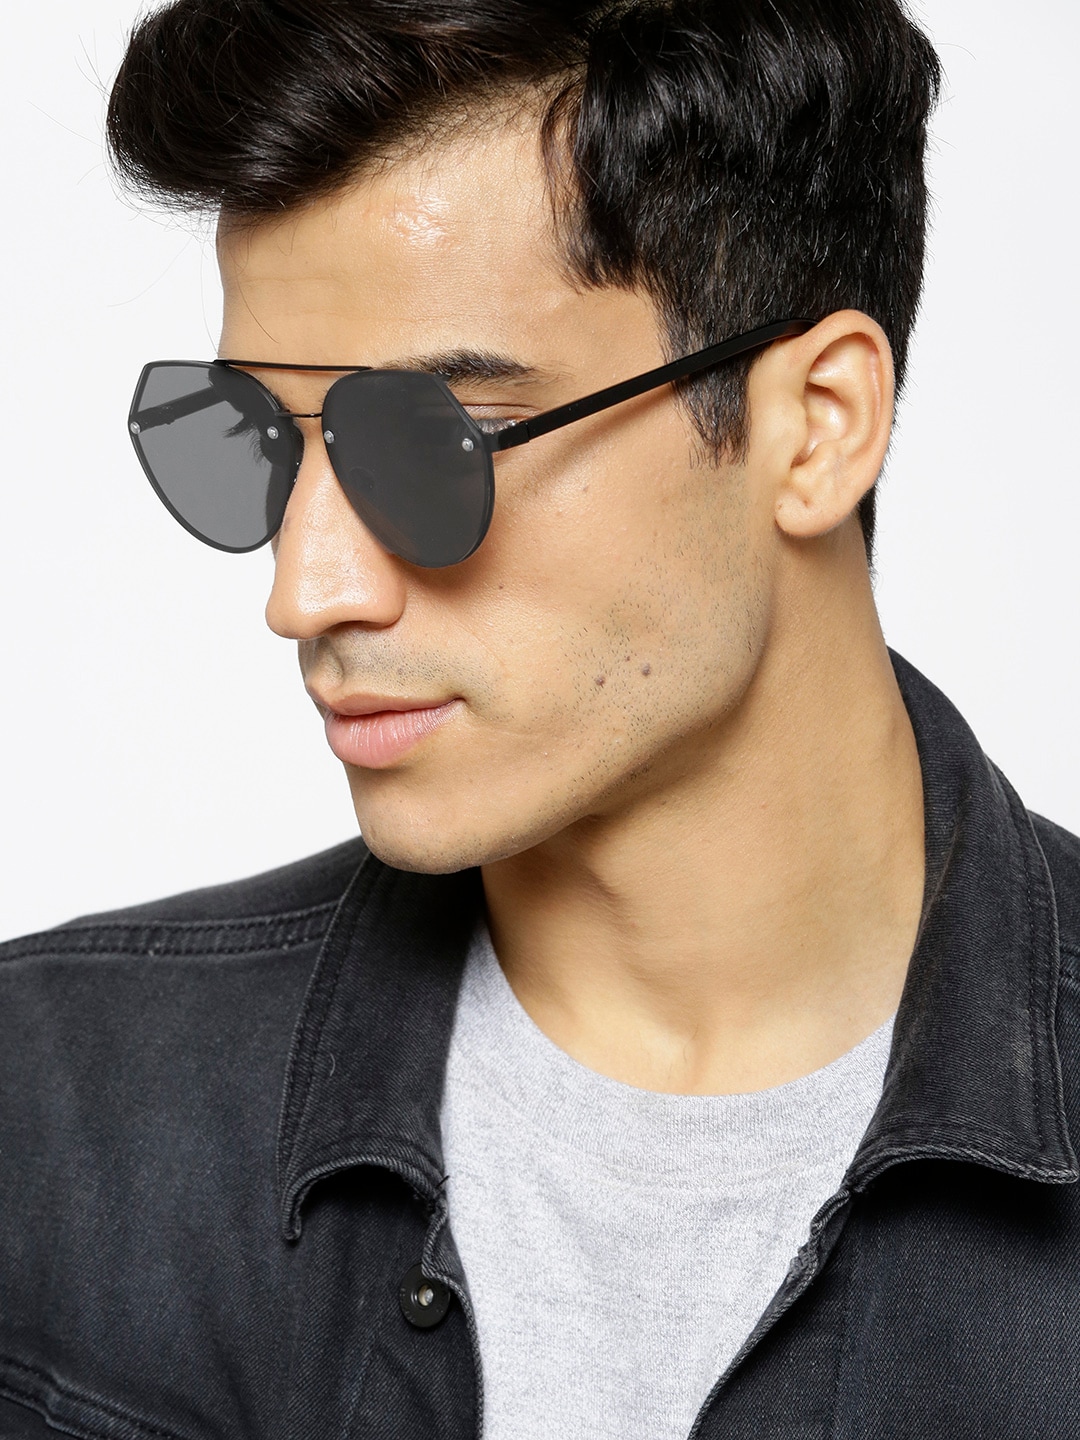 Roadster Unisex Oval Sunglasses MFB-PN-PS-T9583 Price in India